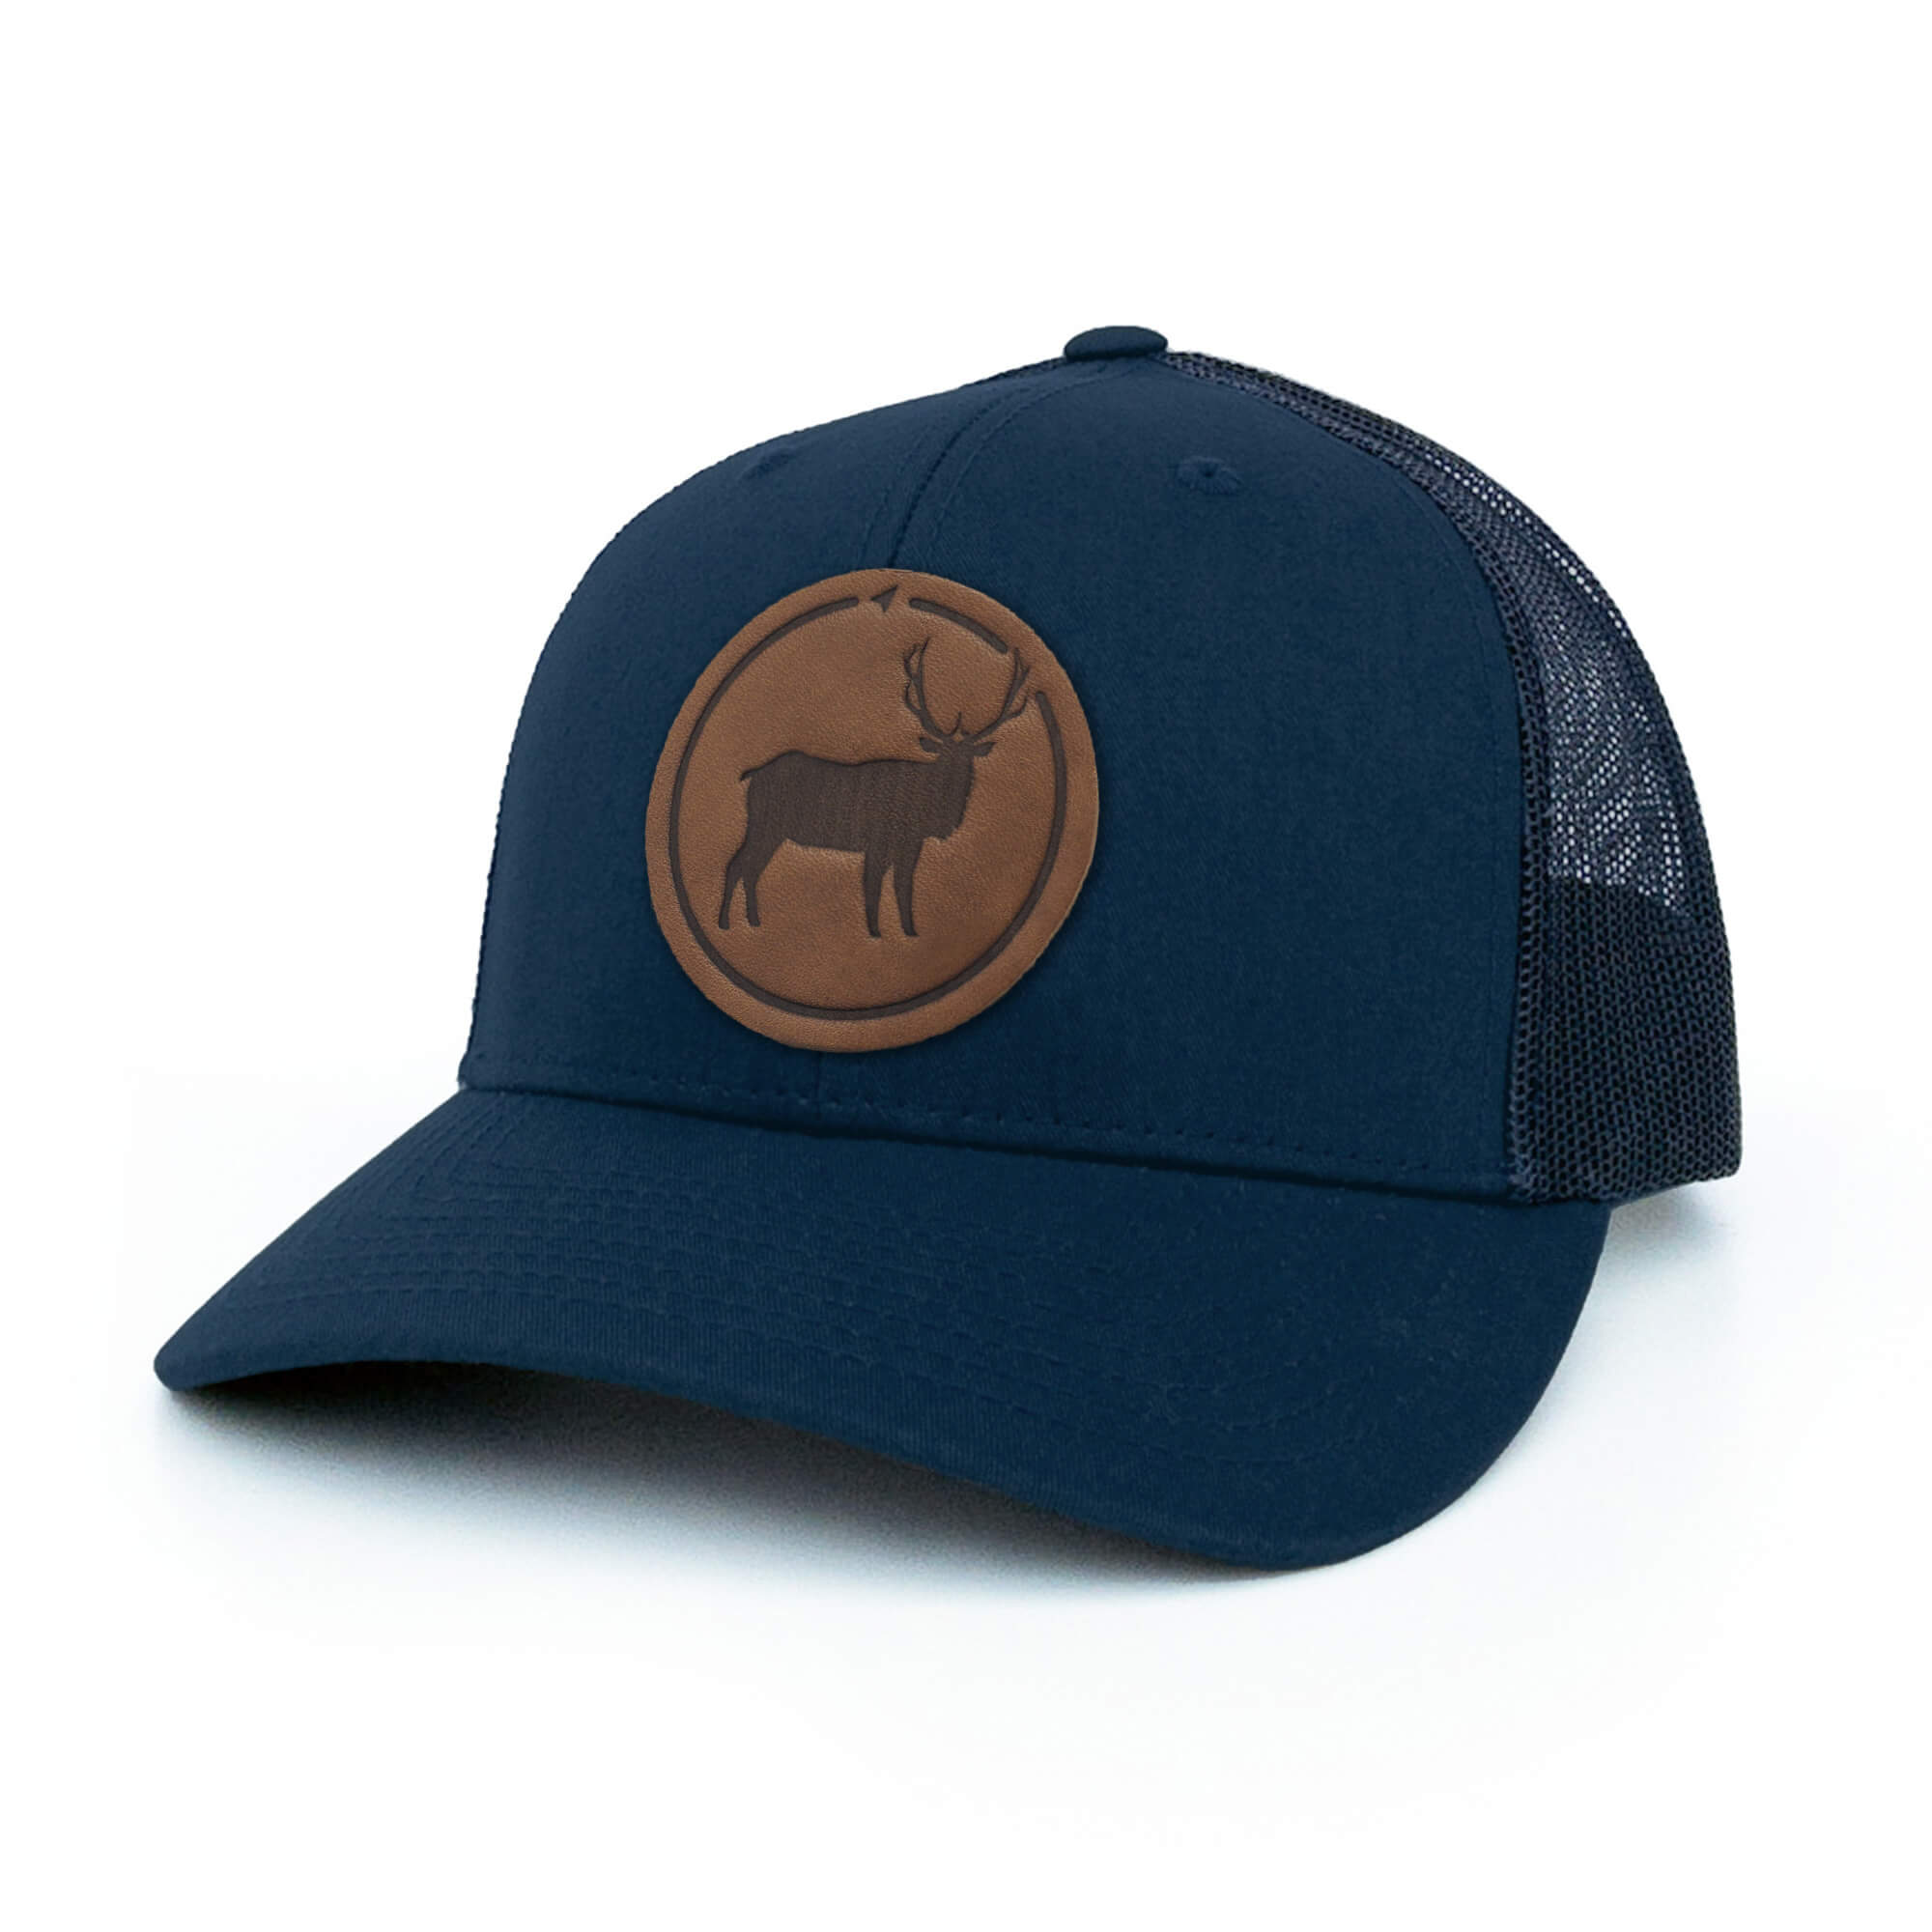 Navy trucker hat with full-grain leather patch of Elk | BLACK-004-006, CHARC-004-006, NAVY-004-006, HGREY-004-006, MOSS-004-006, BROWN-004-006